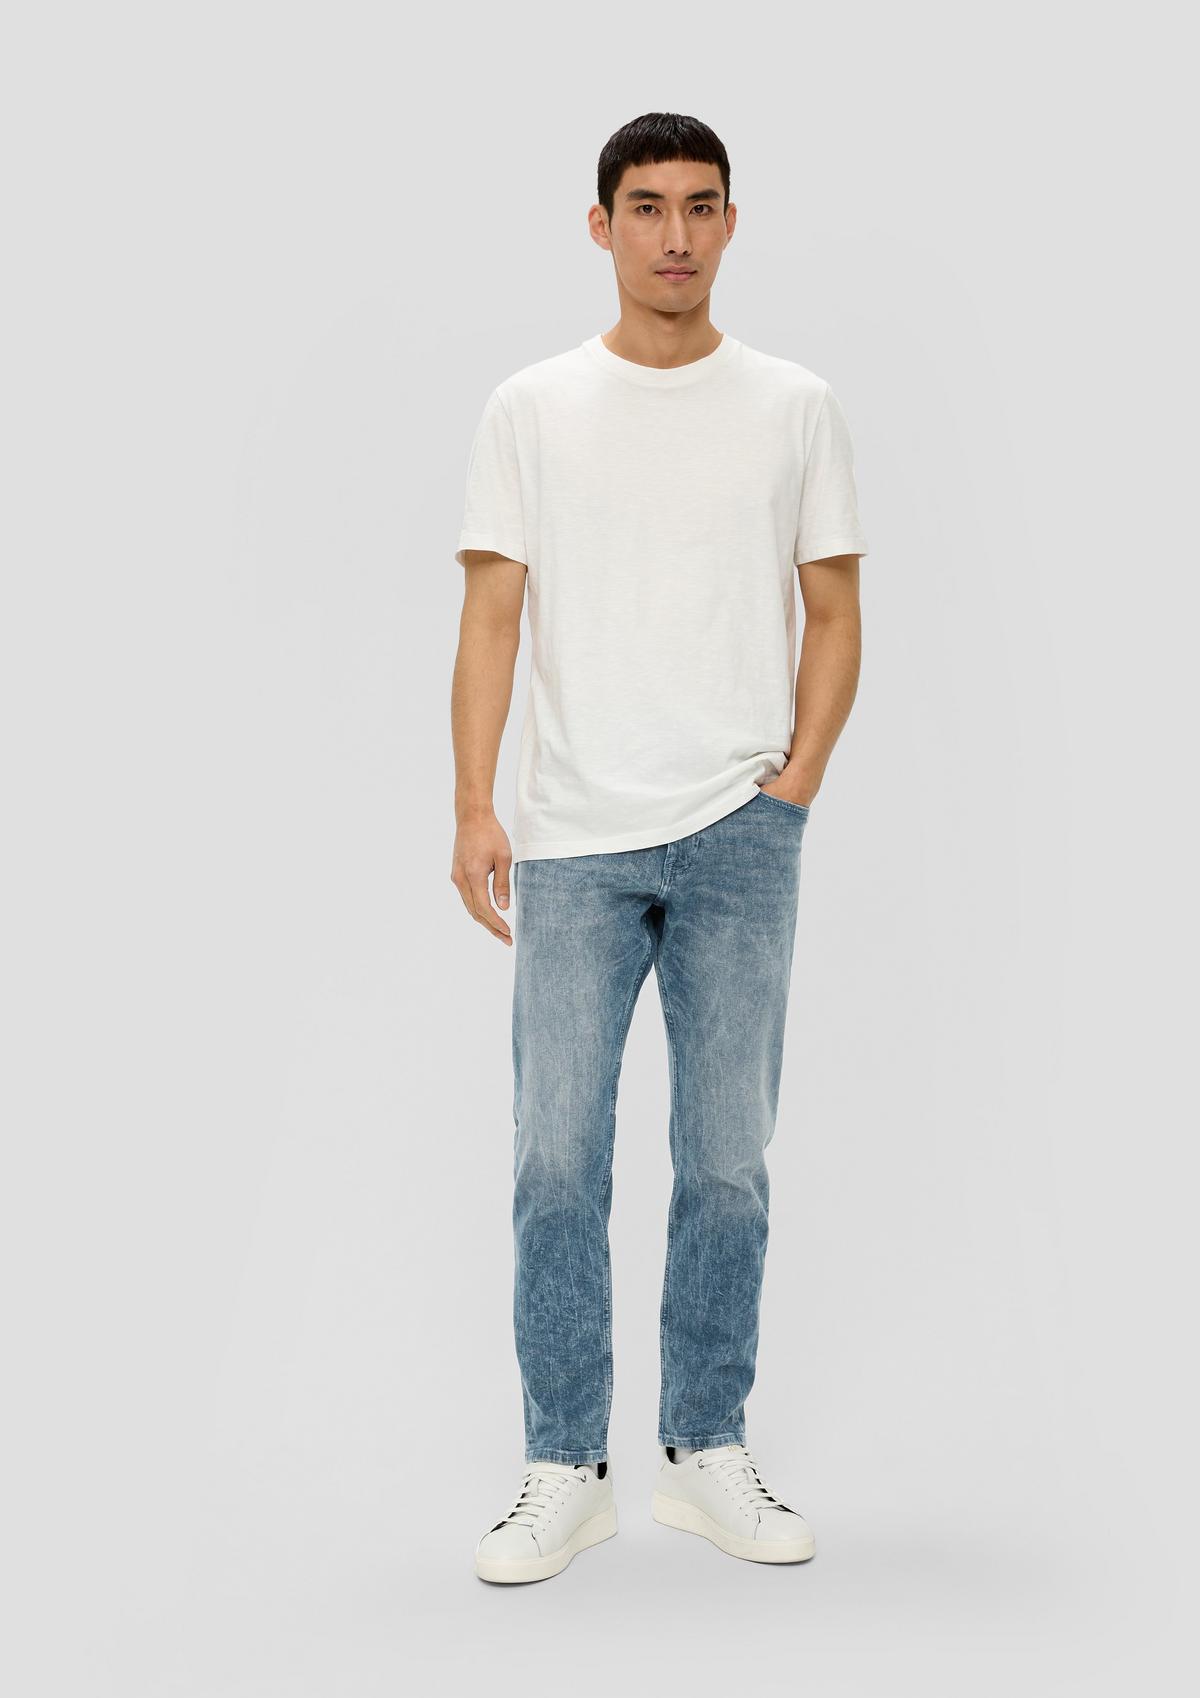 Jeans / regular fit / mid rise / tapered leg